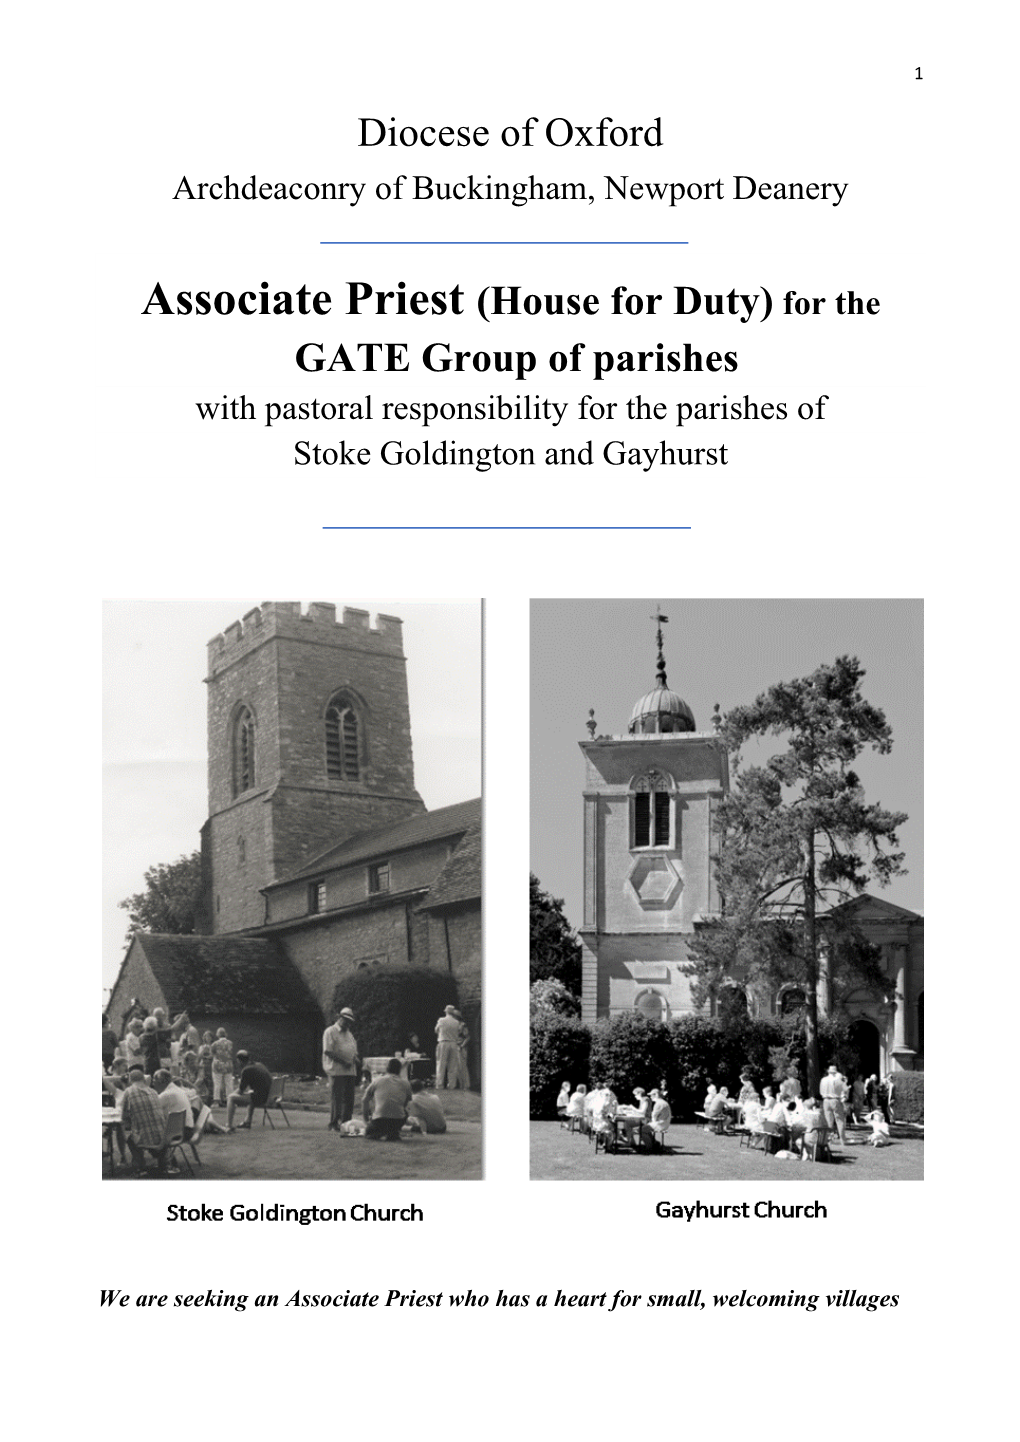 Associate Priest (House for Duty) for the GATE Group of Parishes with Pastoral Responsibility for the Parishes of Stoke Goldington and Gayhurst